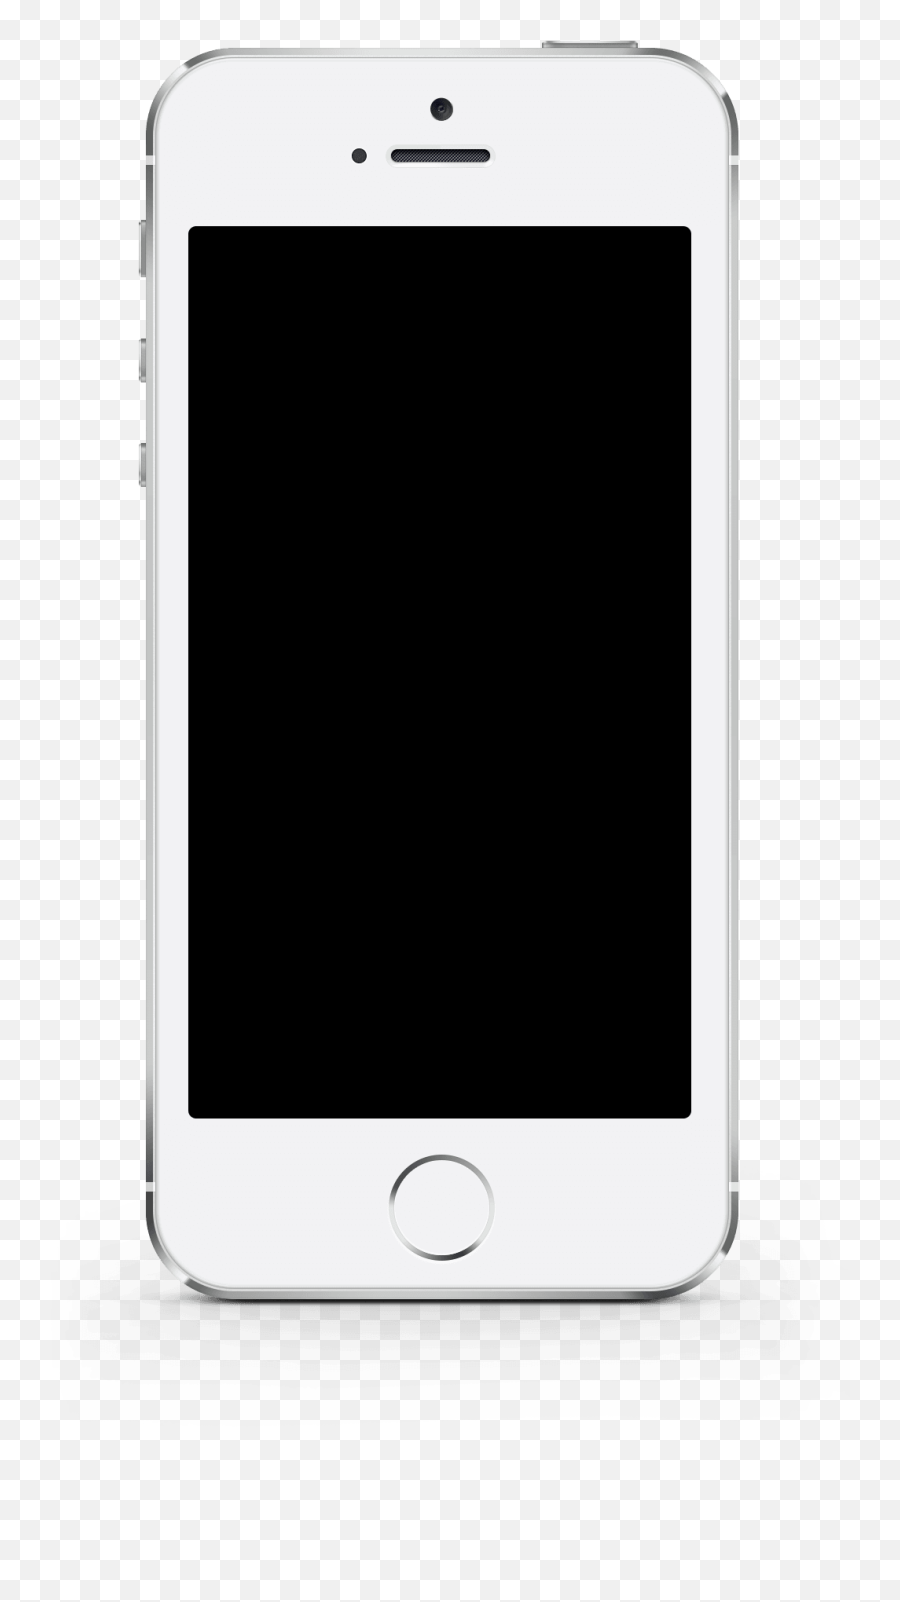 Mobile Free Download Png Images Classic - Transparent Transparent Background Iphone Overlay,Mobile Png